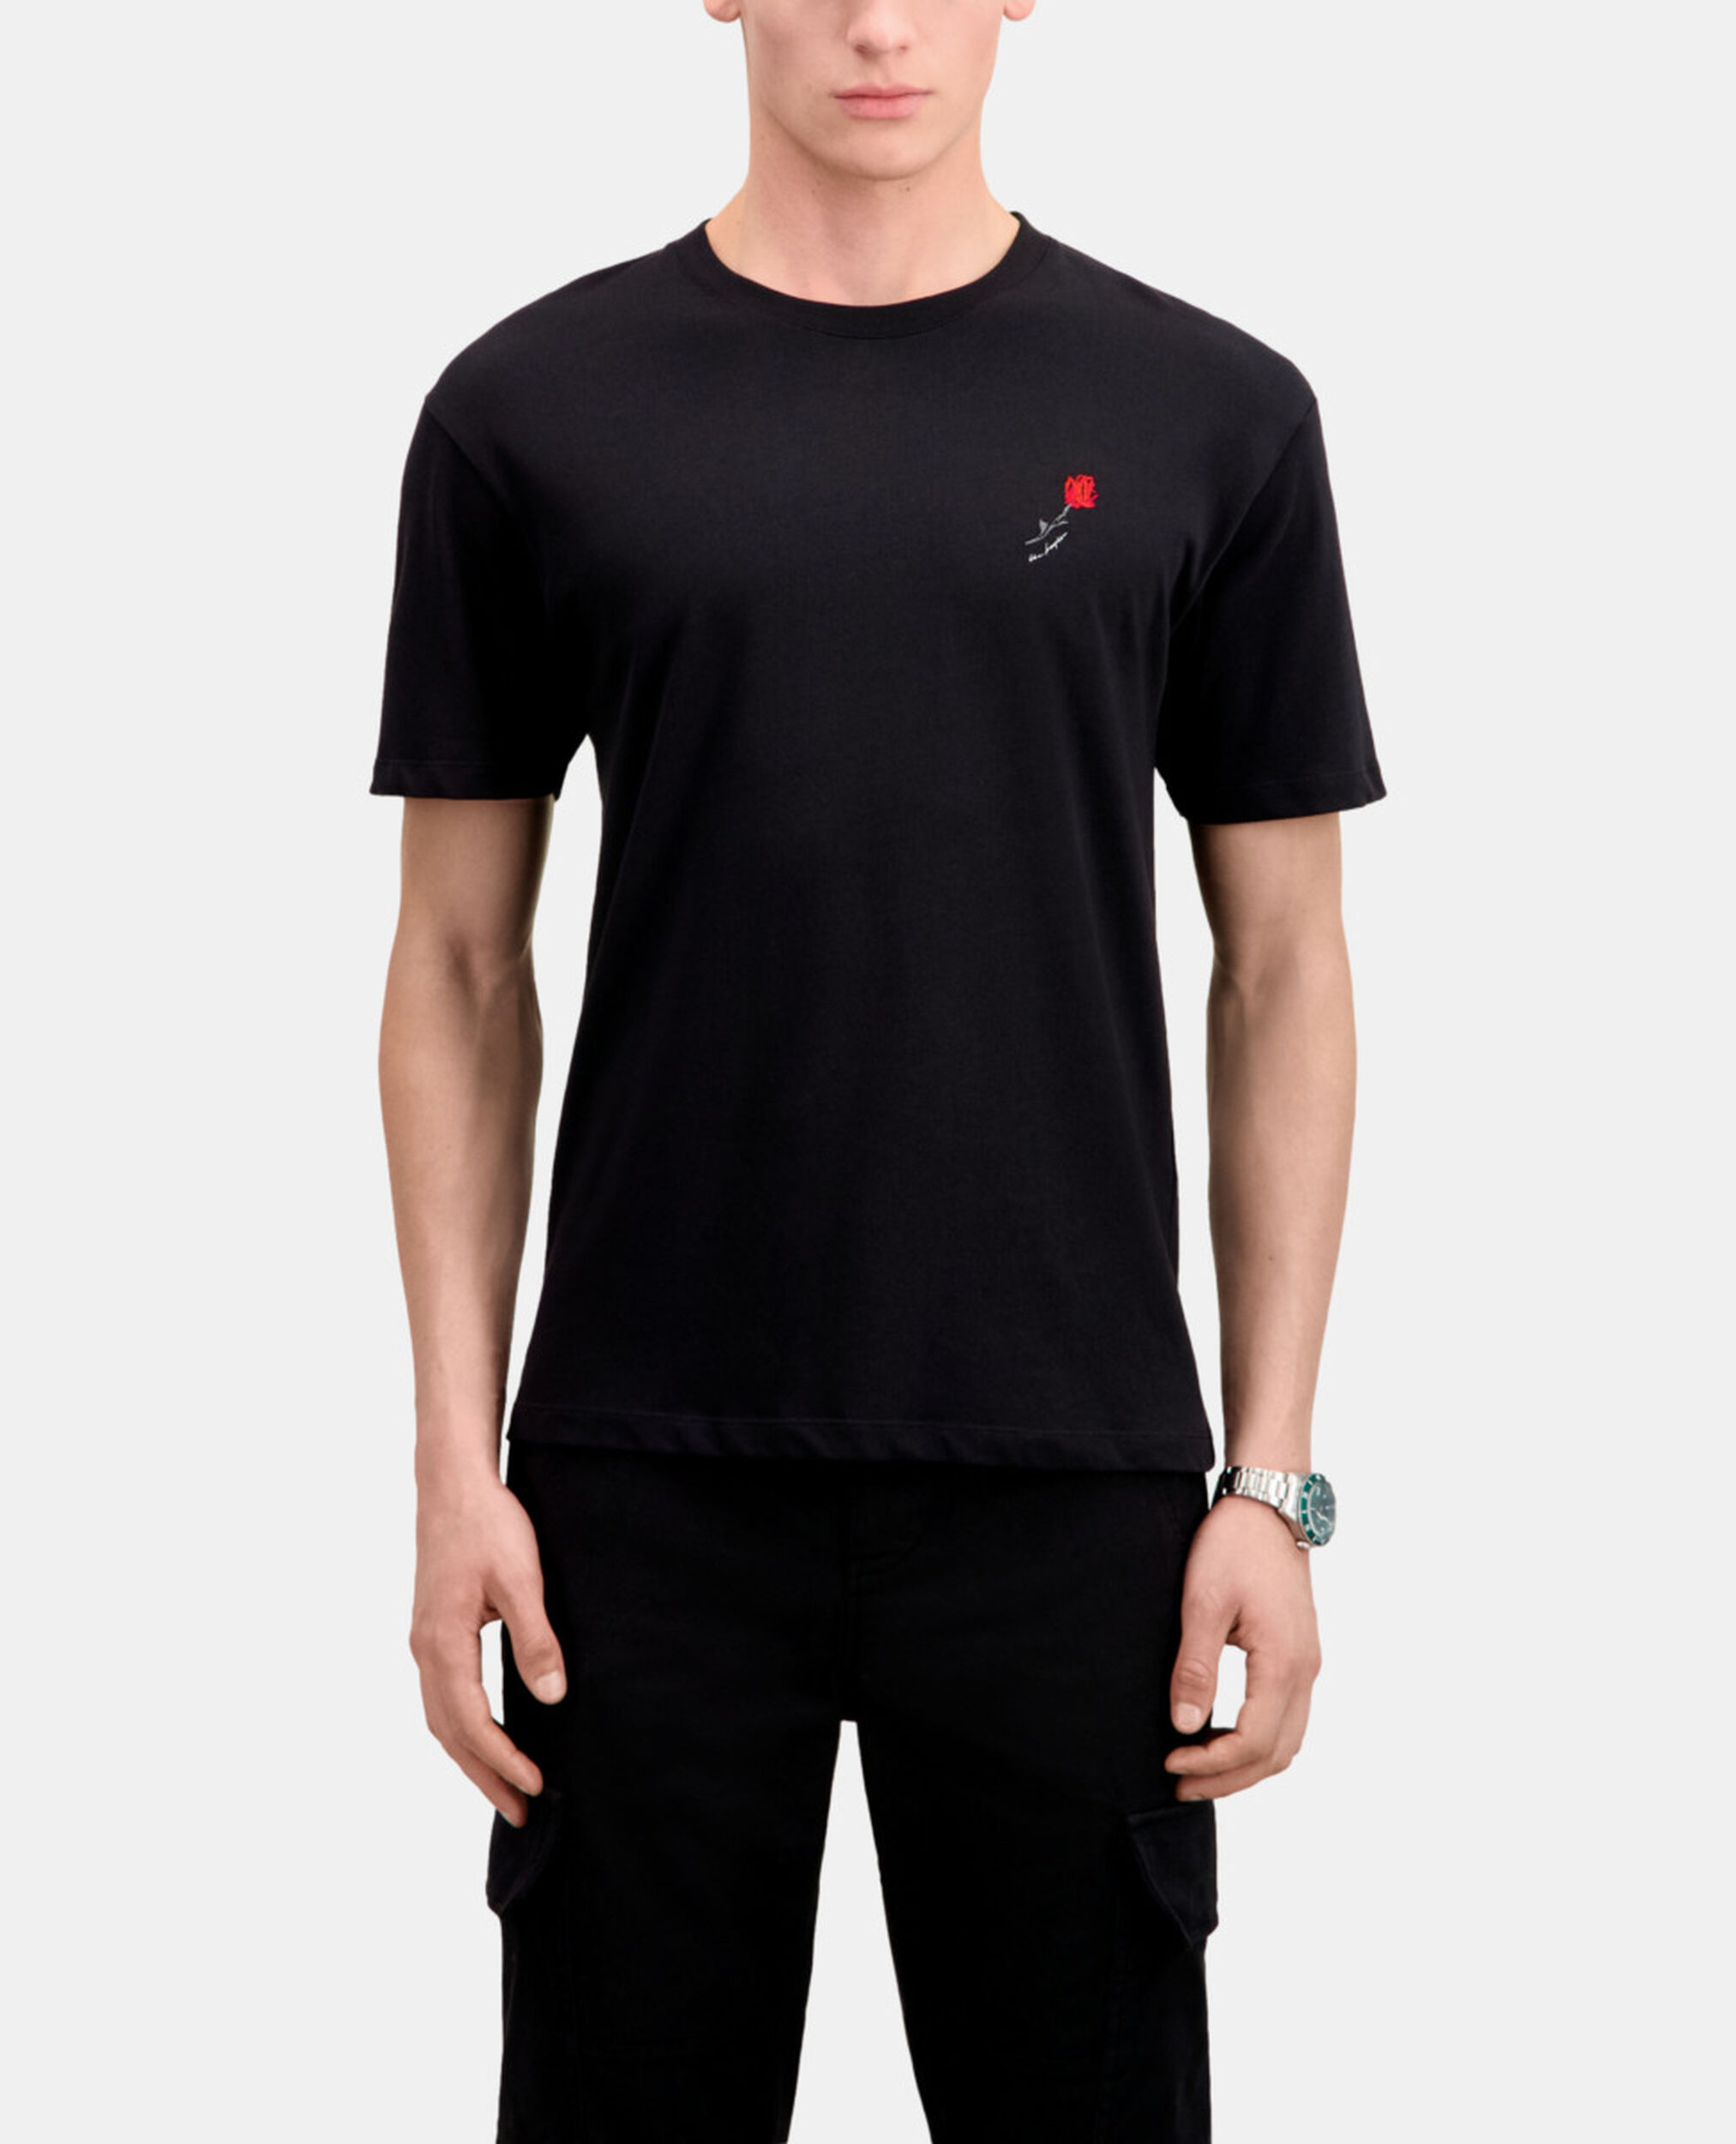 Men's black t-shirt with flower embroidery, BLACK, hi-res image number null